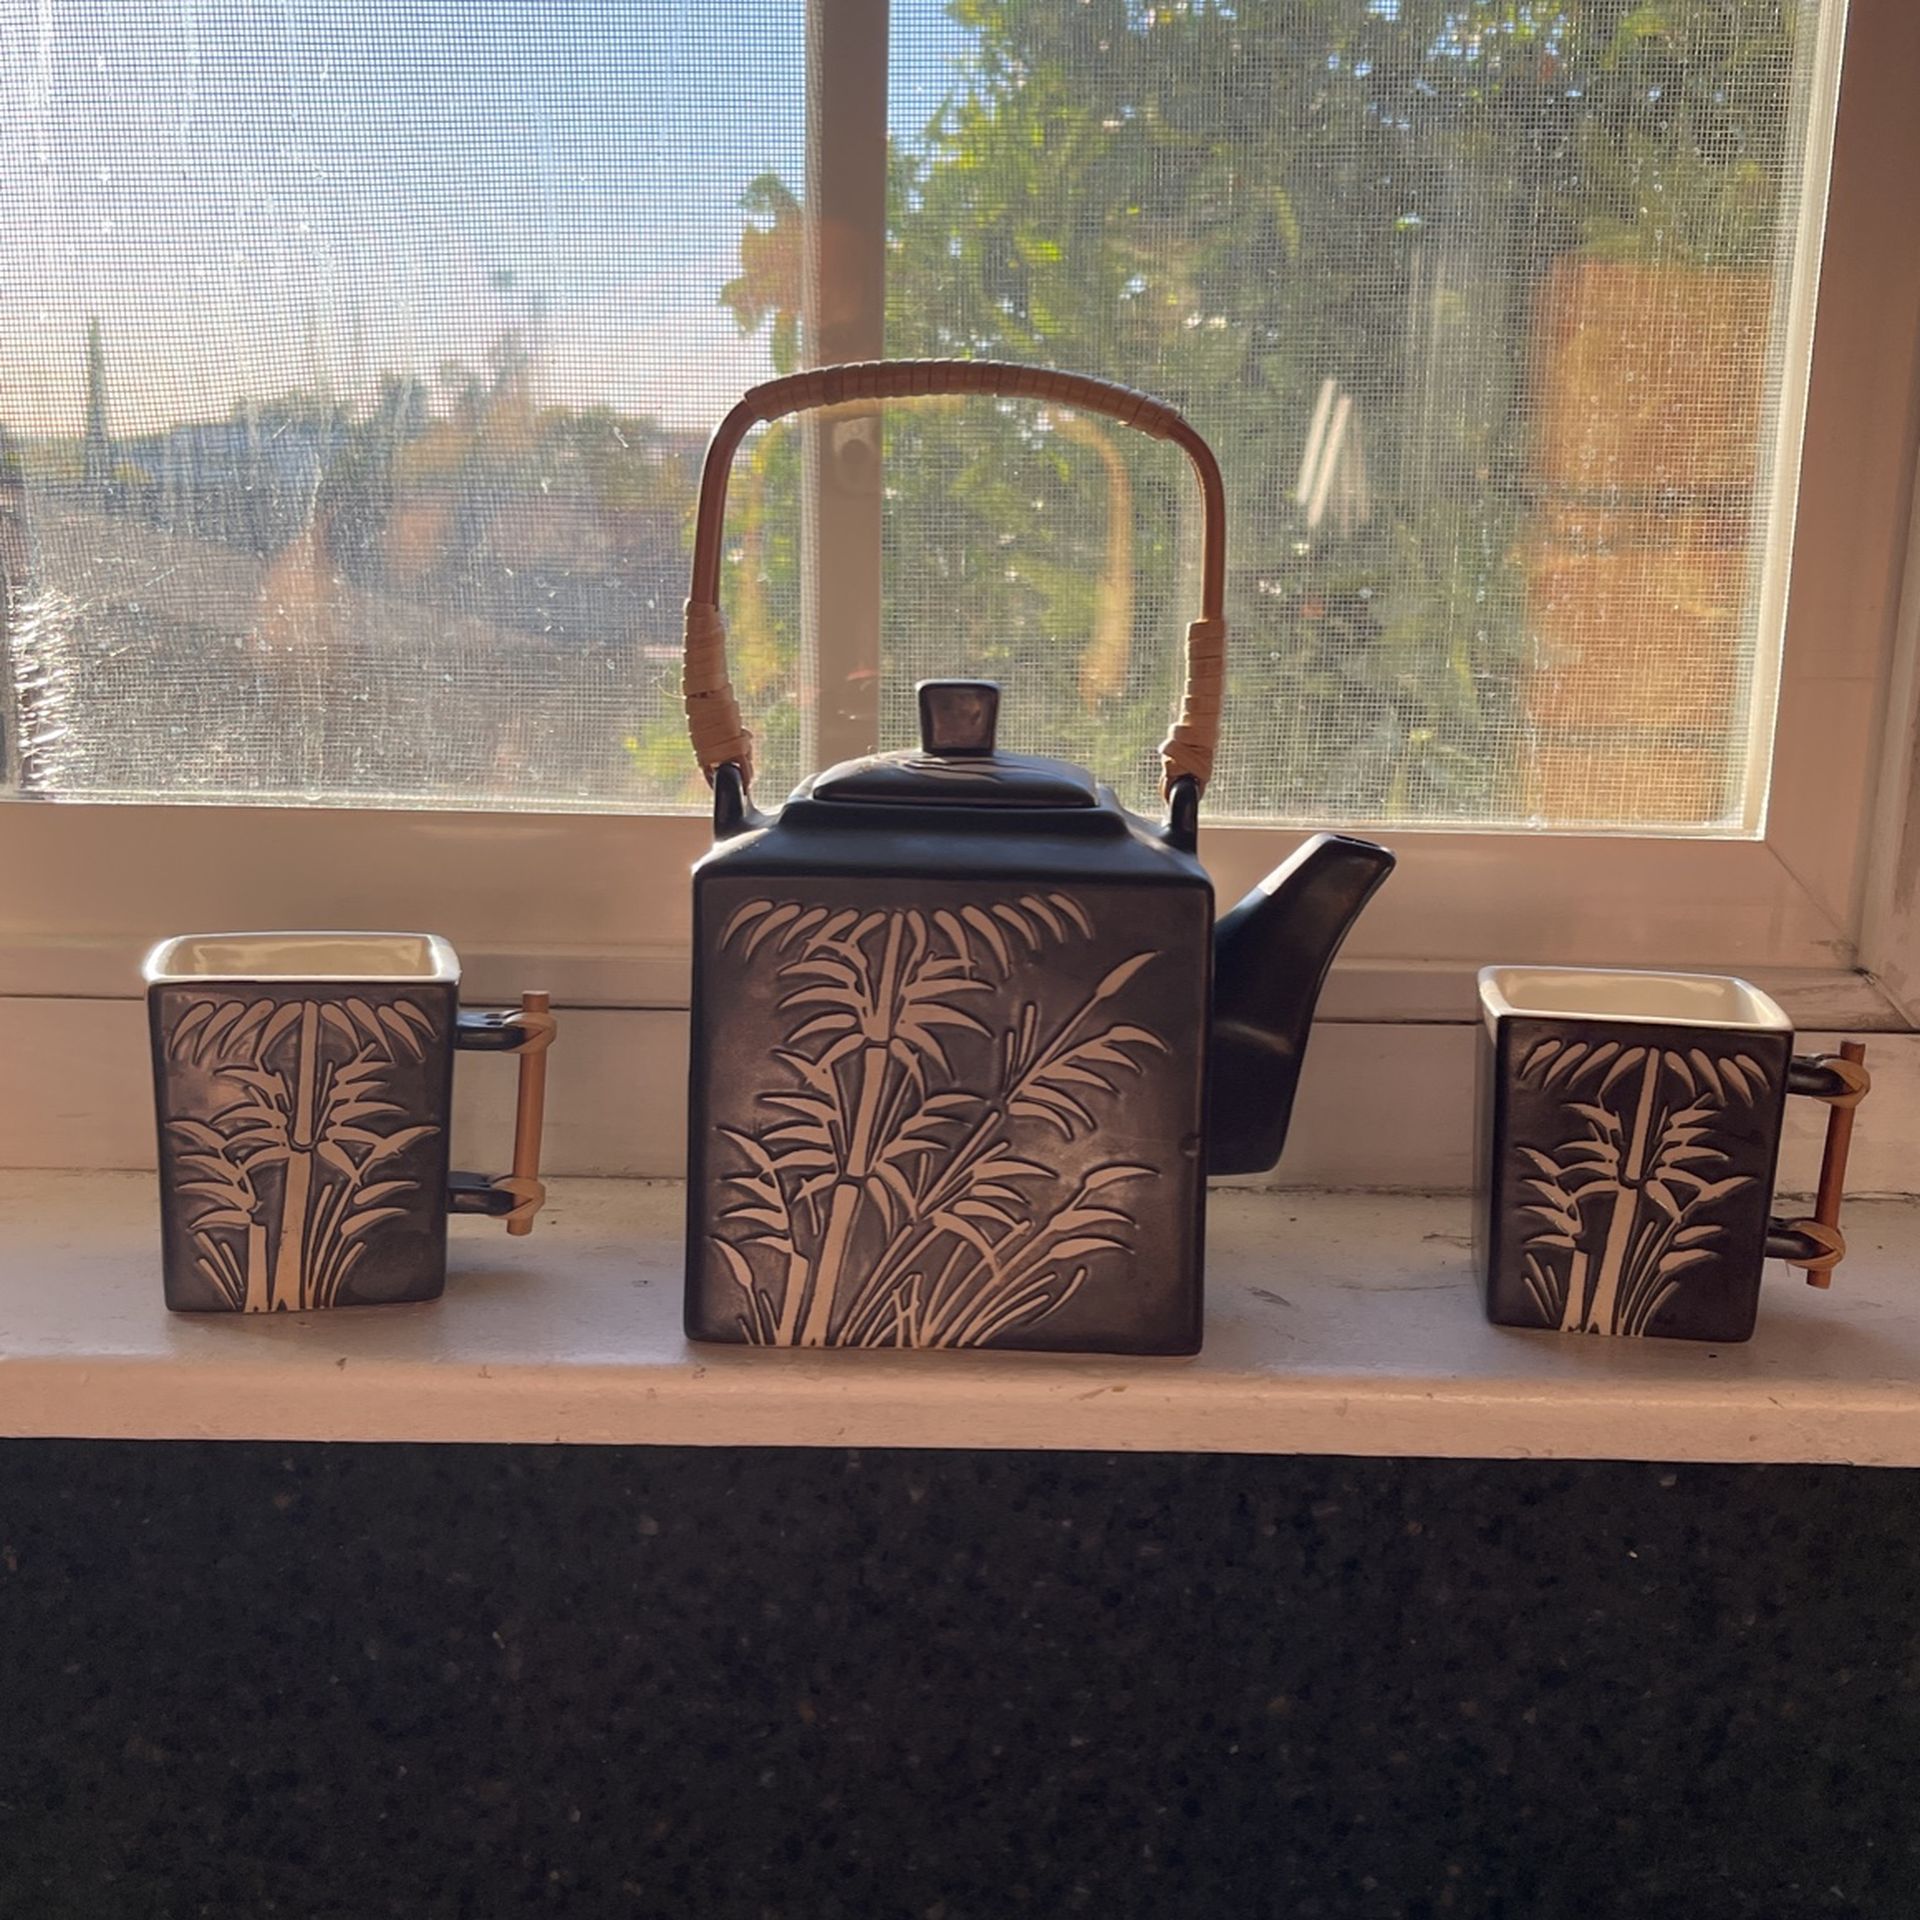 Tea Set Bamboo Style From Target - Never Used